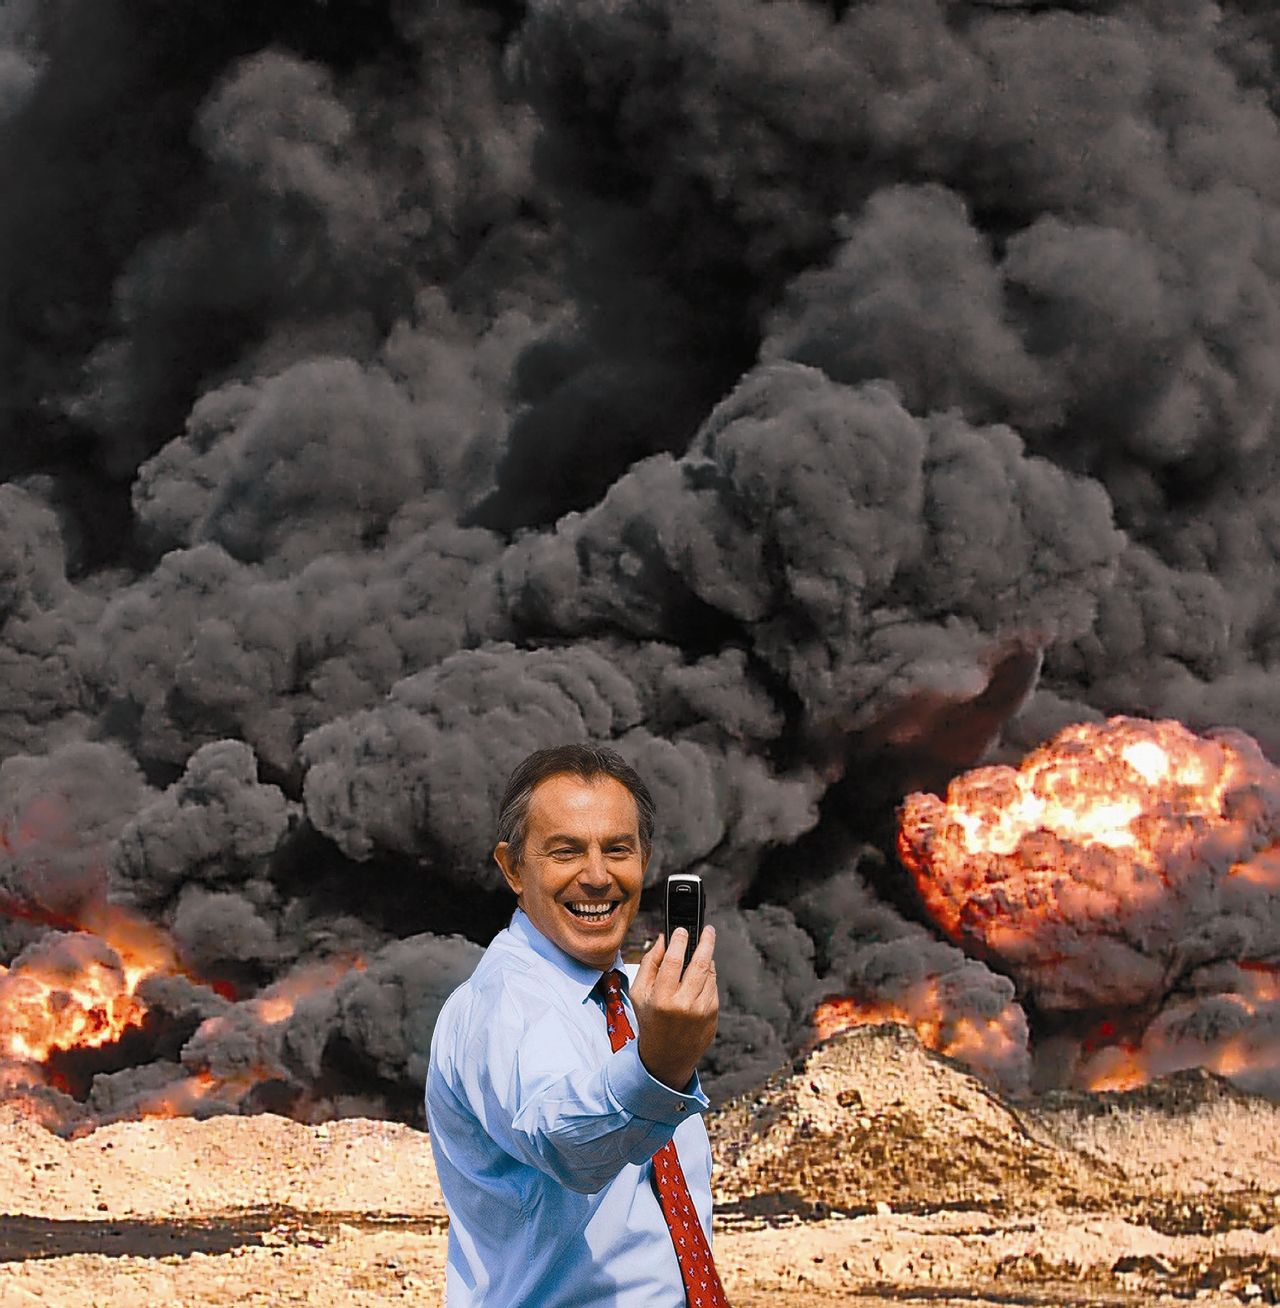 British duo kennardphillipps created the photomontage "Photo Op" in 2005 by digitally altering a photograph of then British Prime Minister Tony Blair.